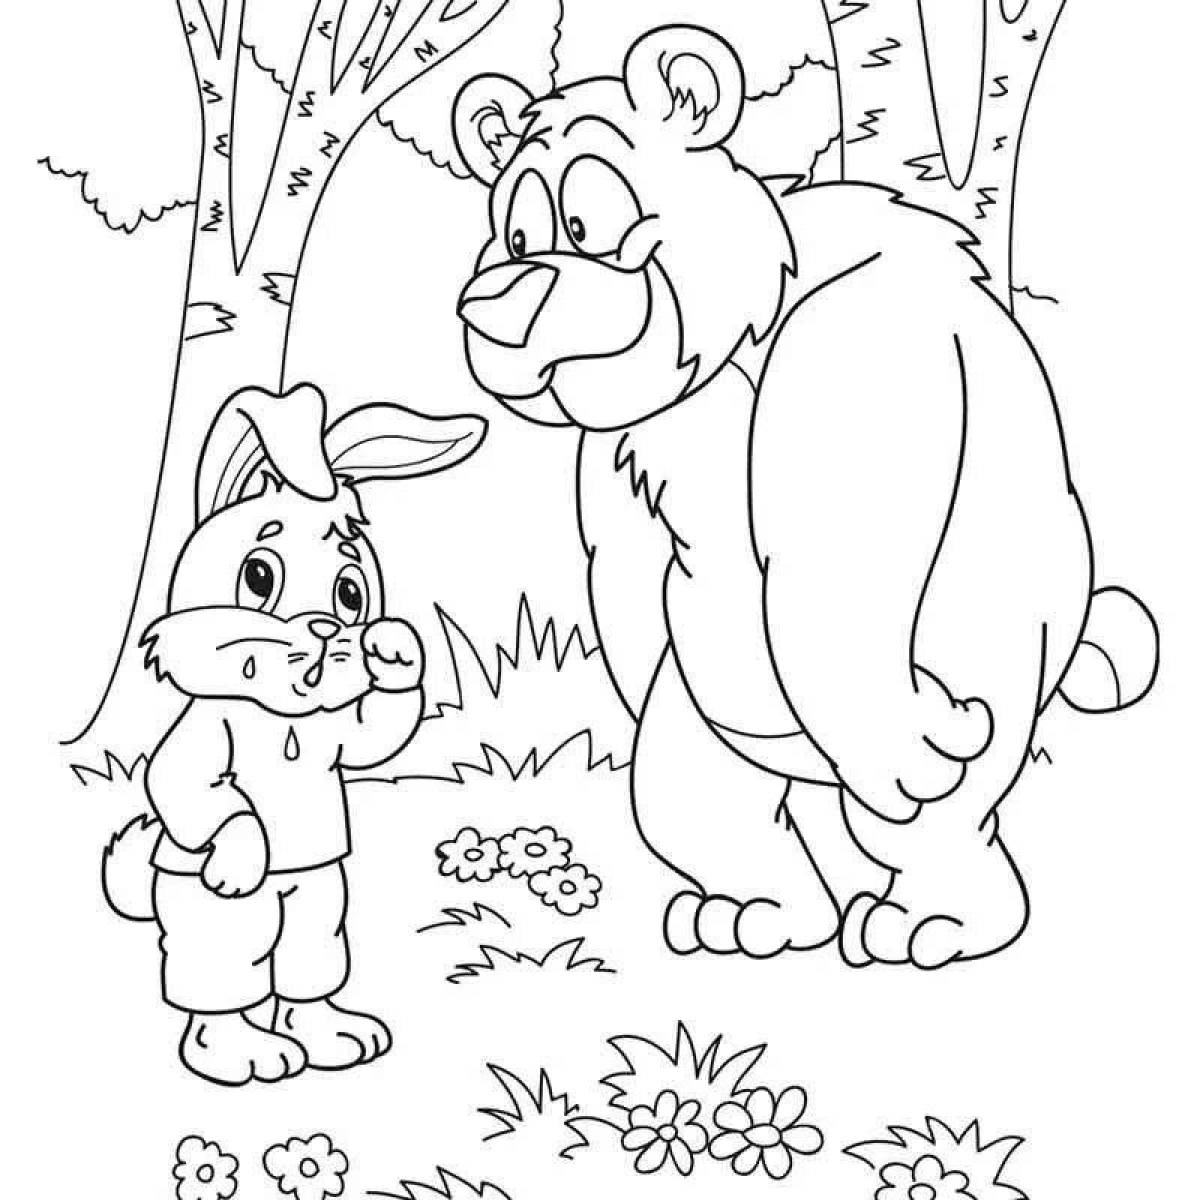 Coloring book bright bear and fox